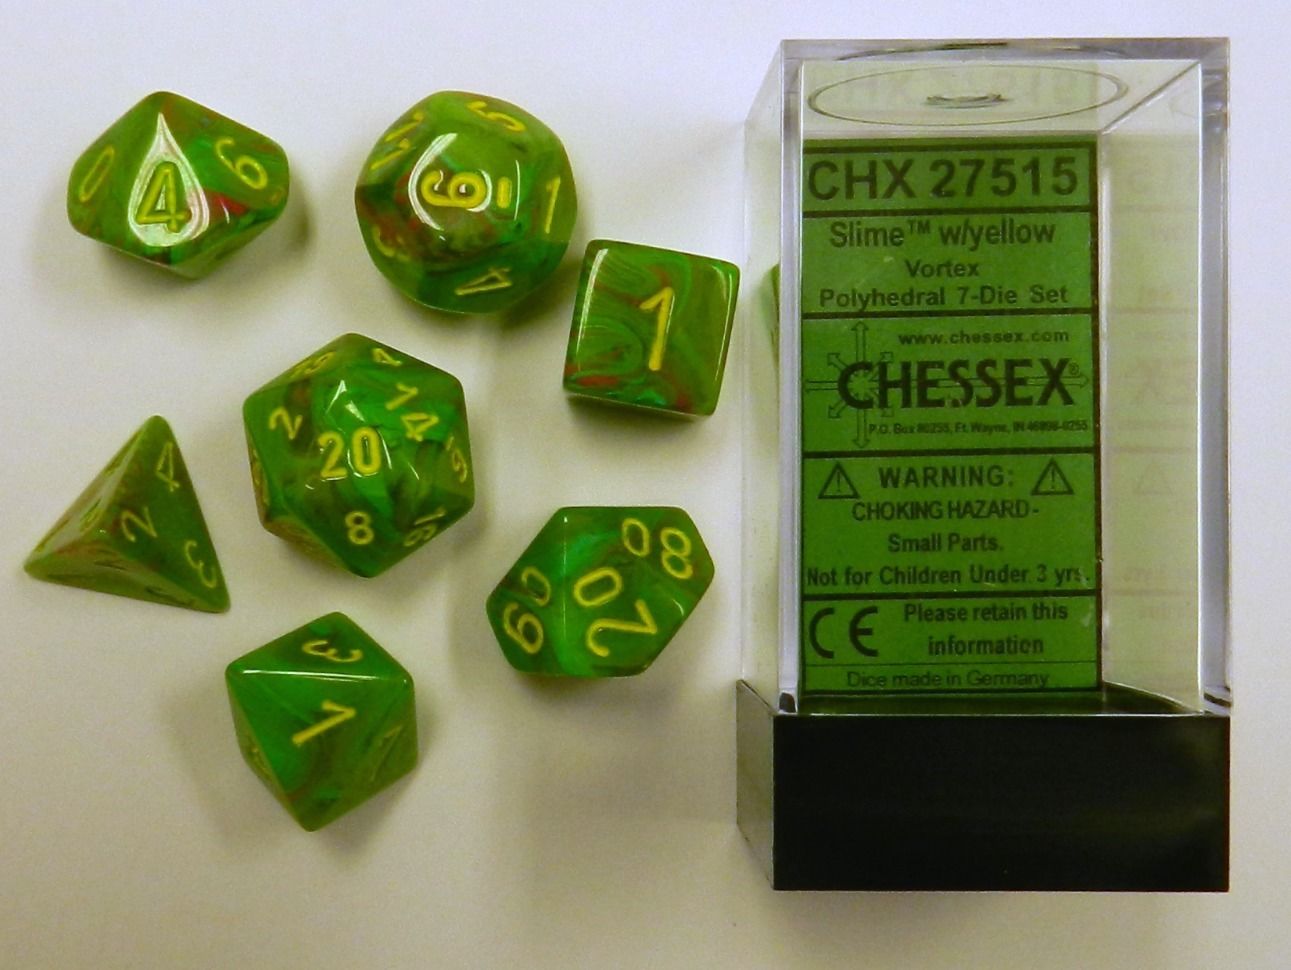 7-set Poly Dice Cube Vortex Slime//yellow Chessex Manufacturing Chx27515 for sale online